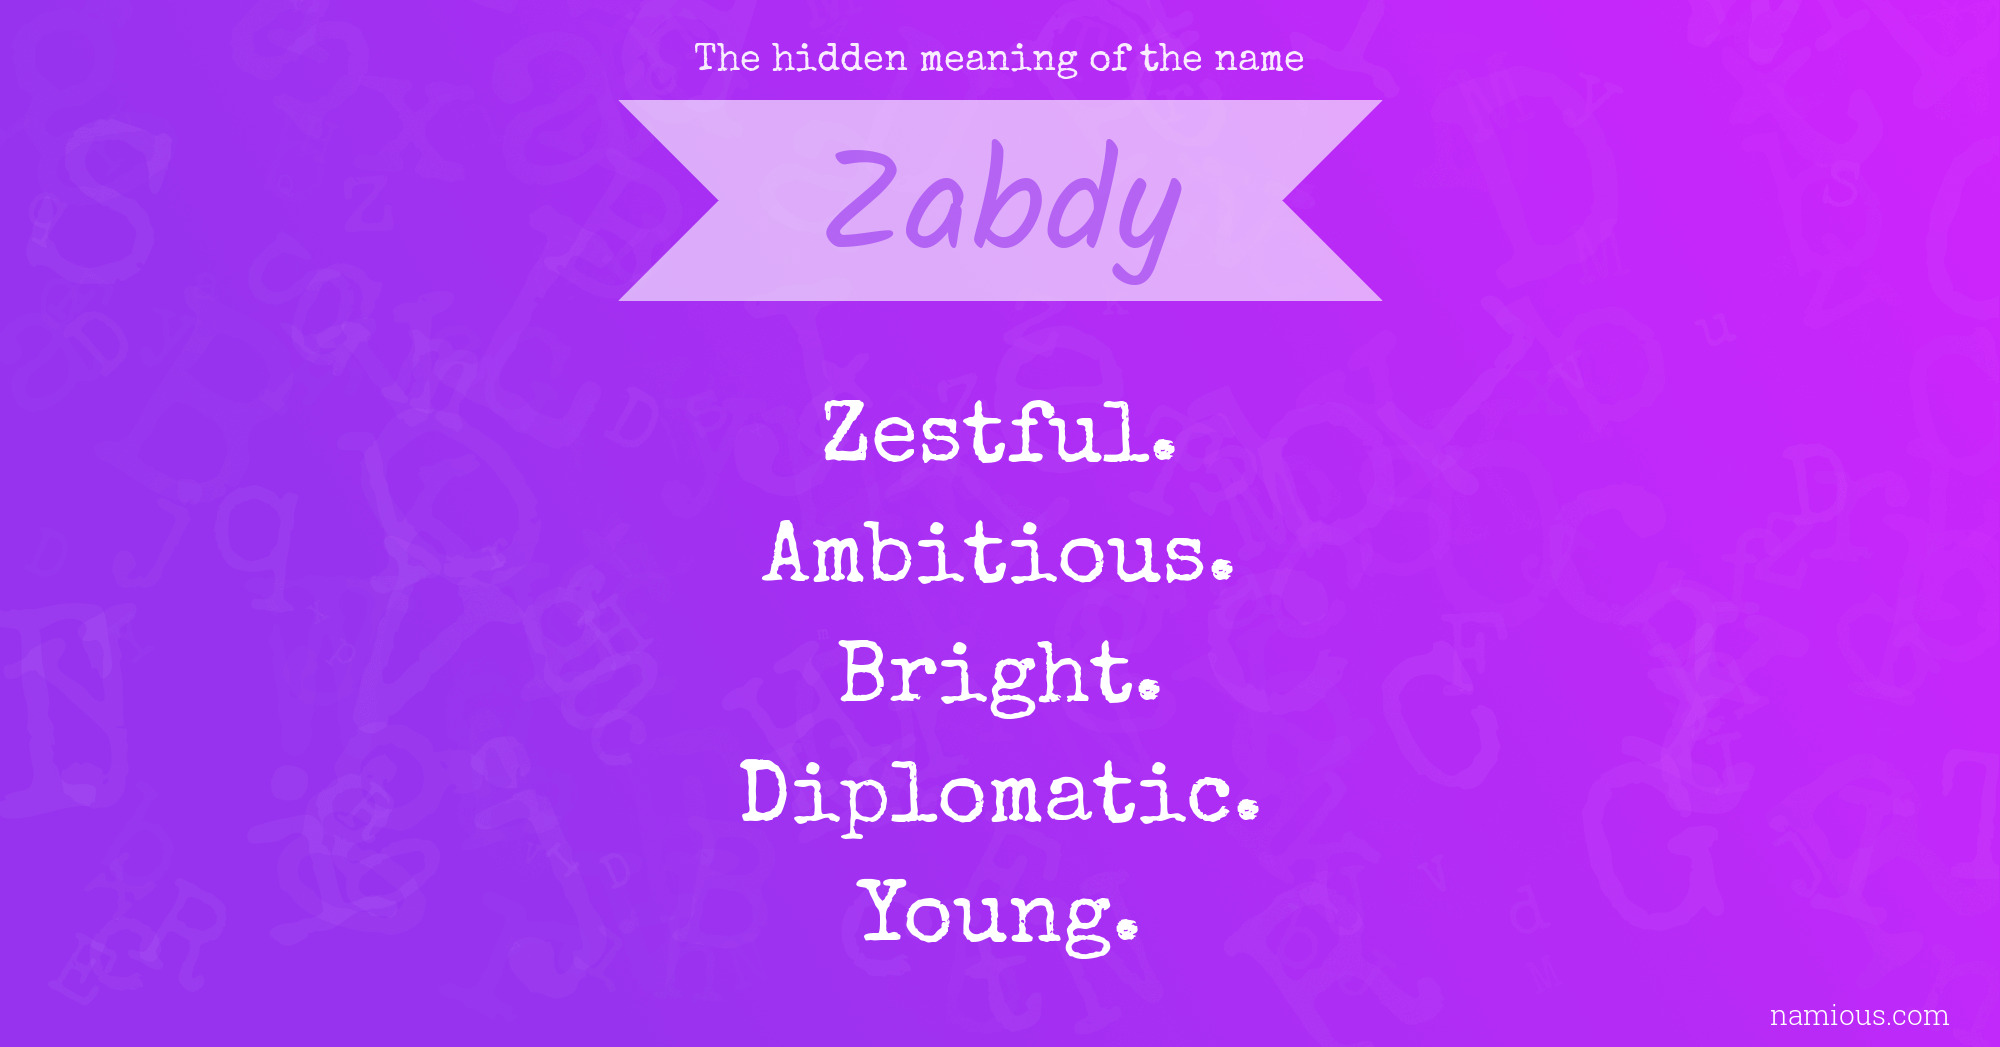 The hidden meaning of the name Zabdy